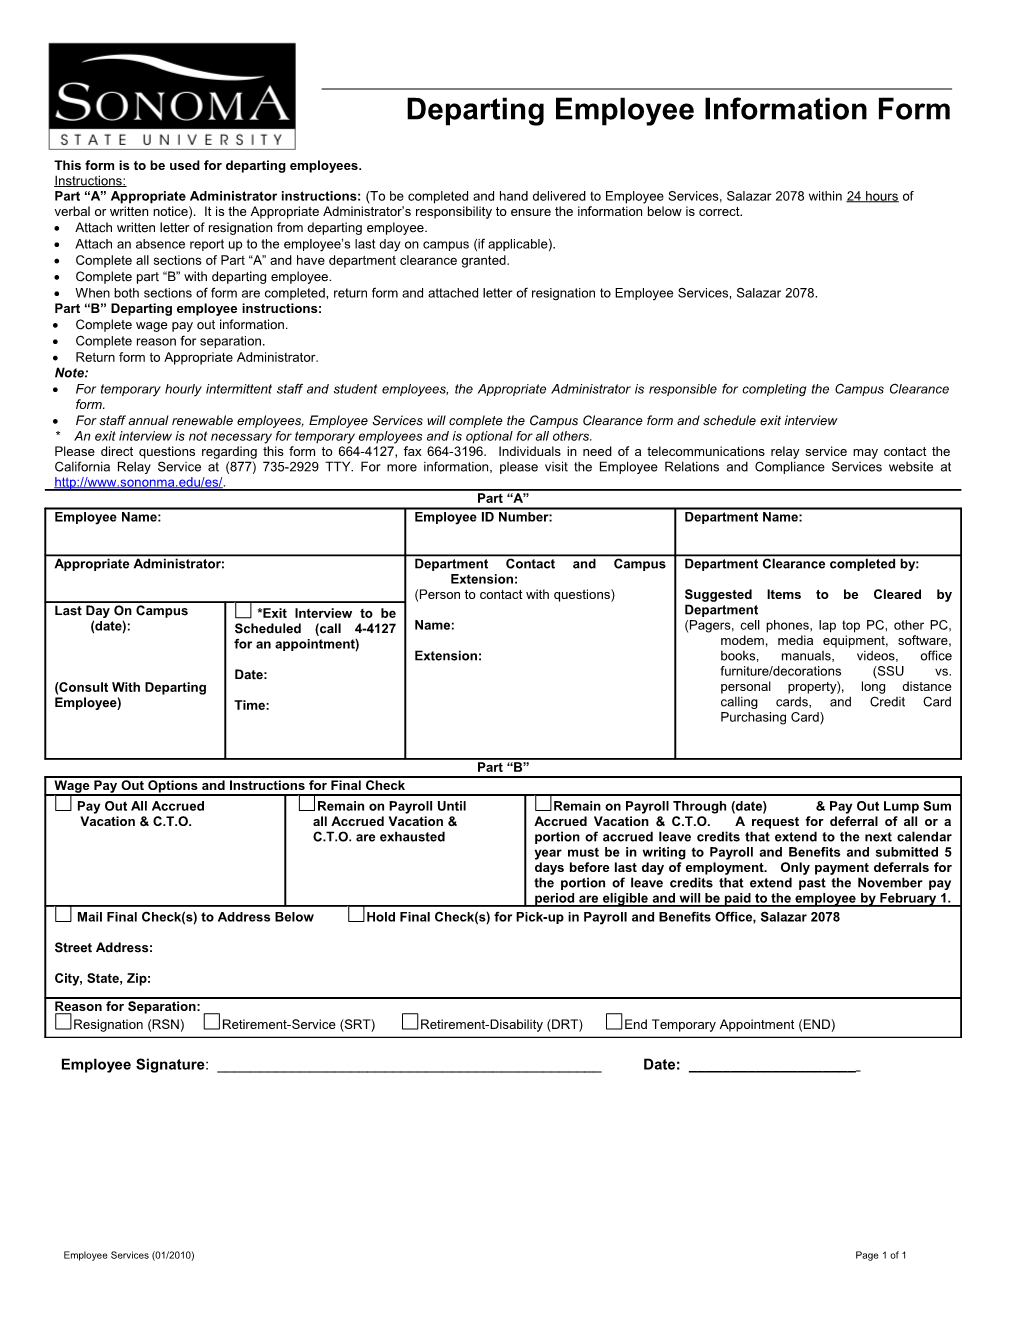 This Form Is to Be Used for Departing Employees